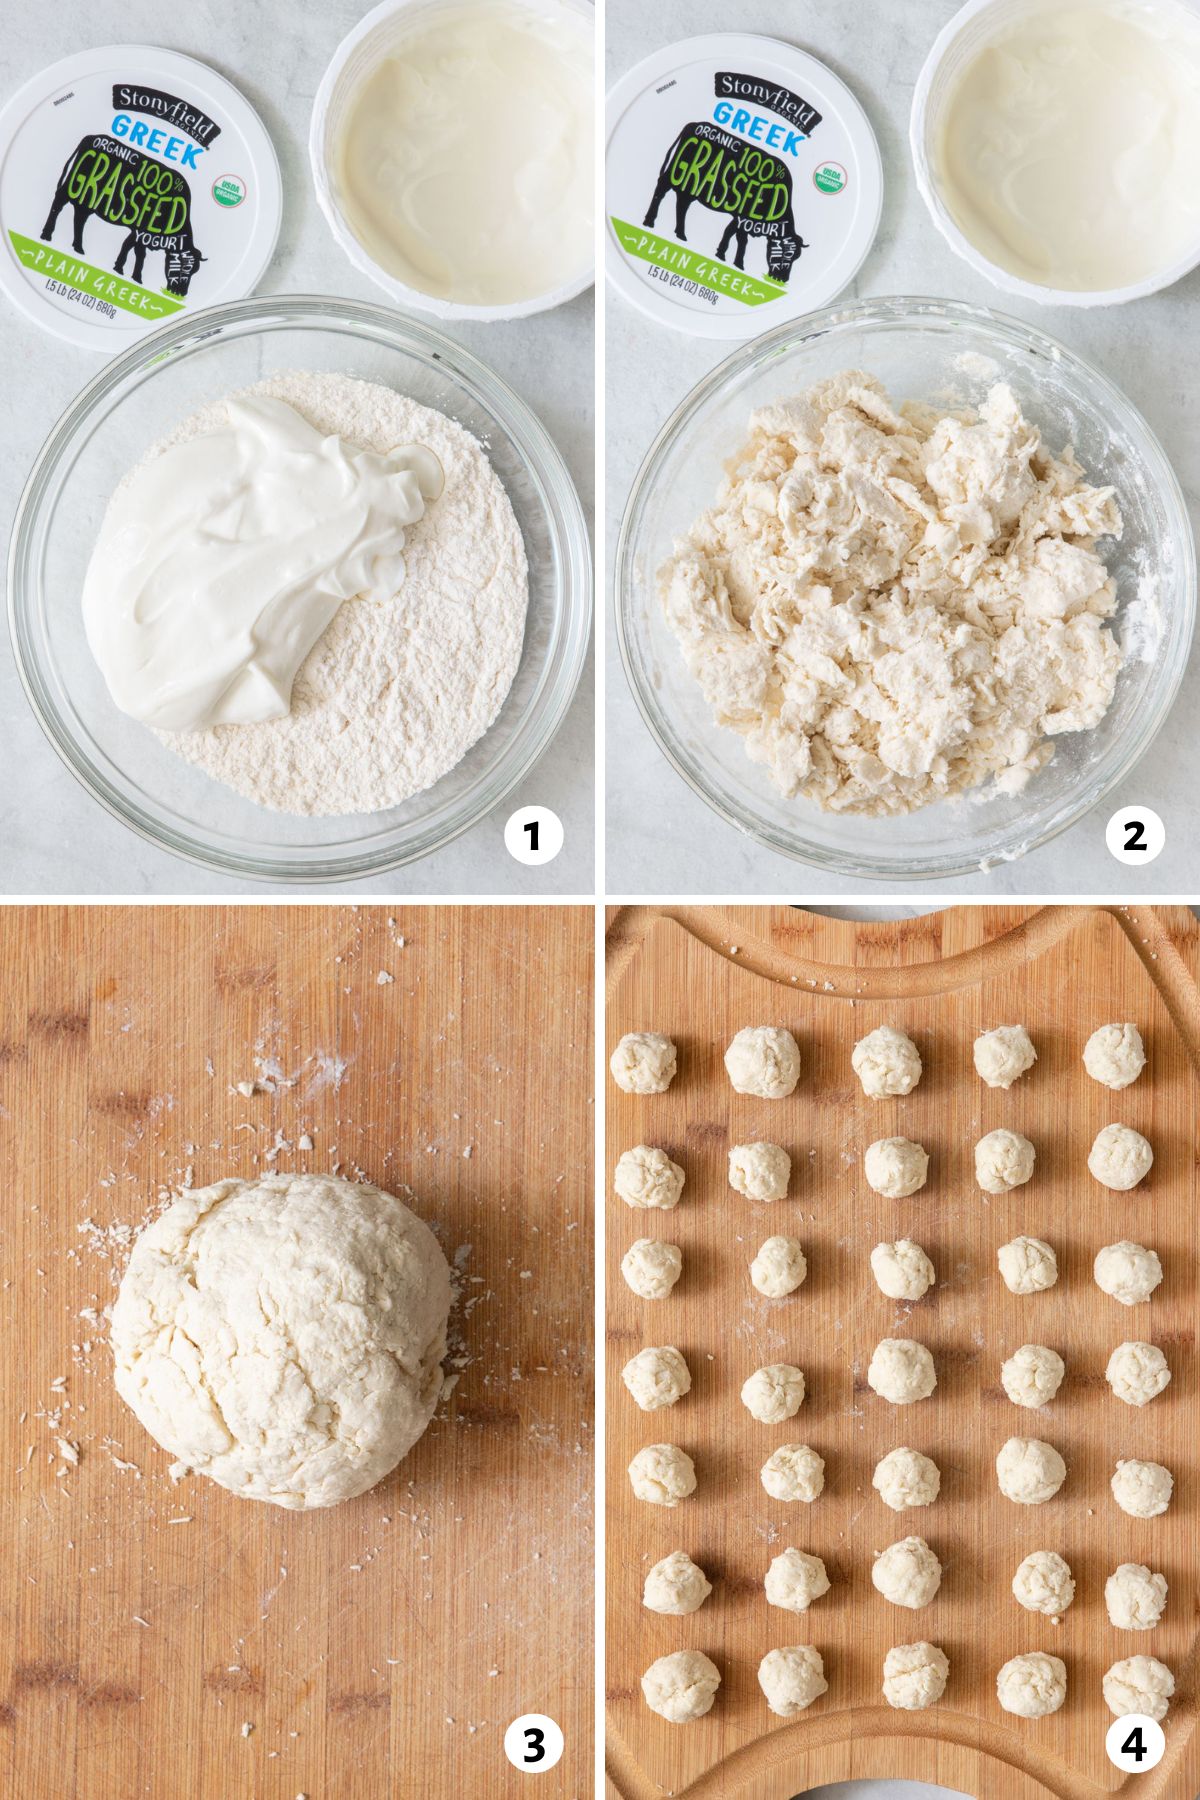 4 image collage making dough with Stoneyfield plain Greek yogurt in small bowl, forming into a large ball, and then dividing into many small dough balls.